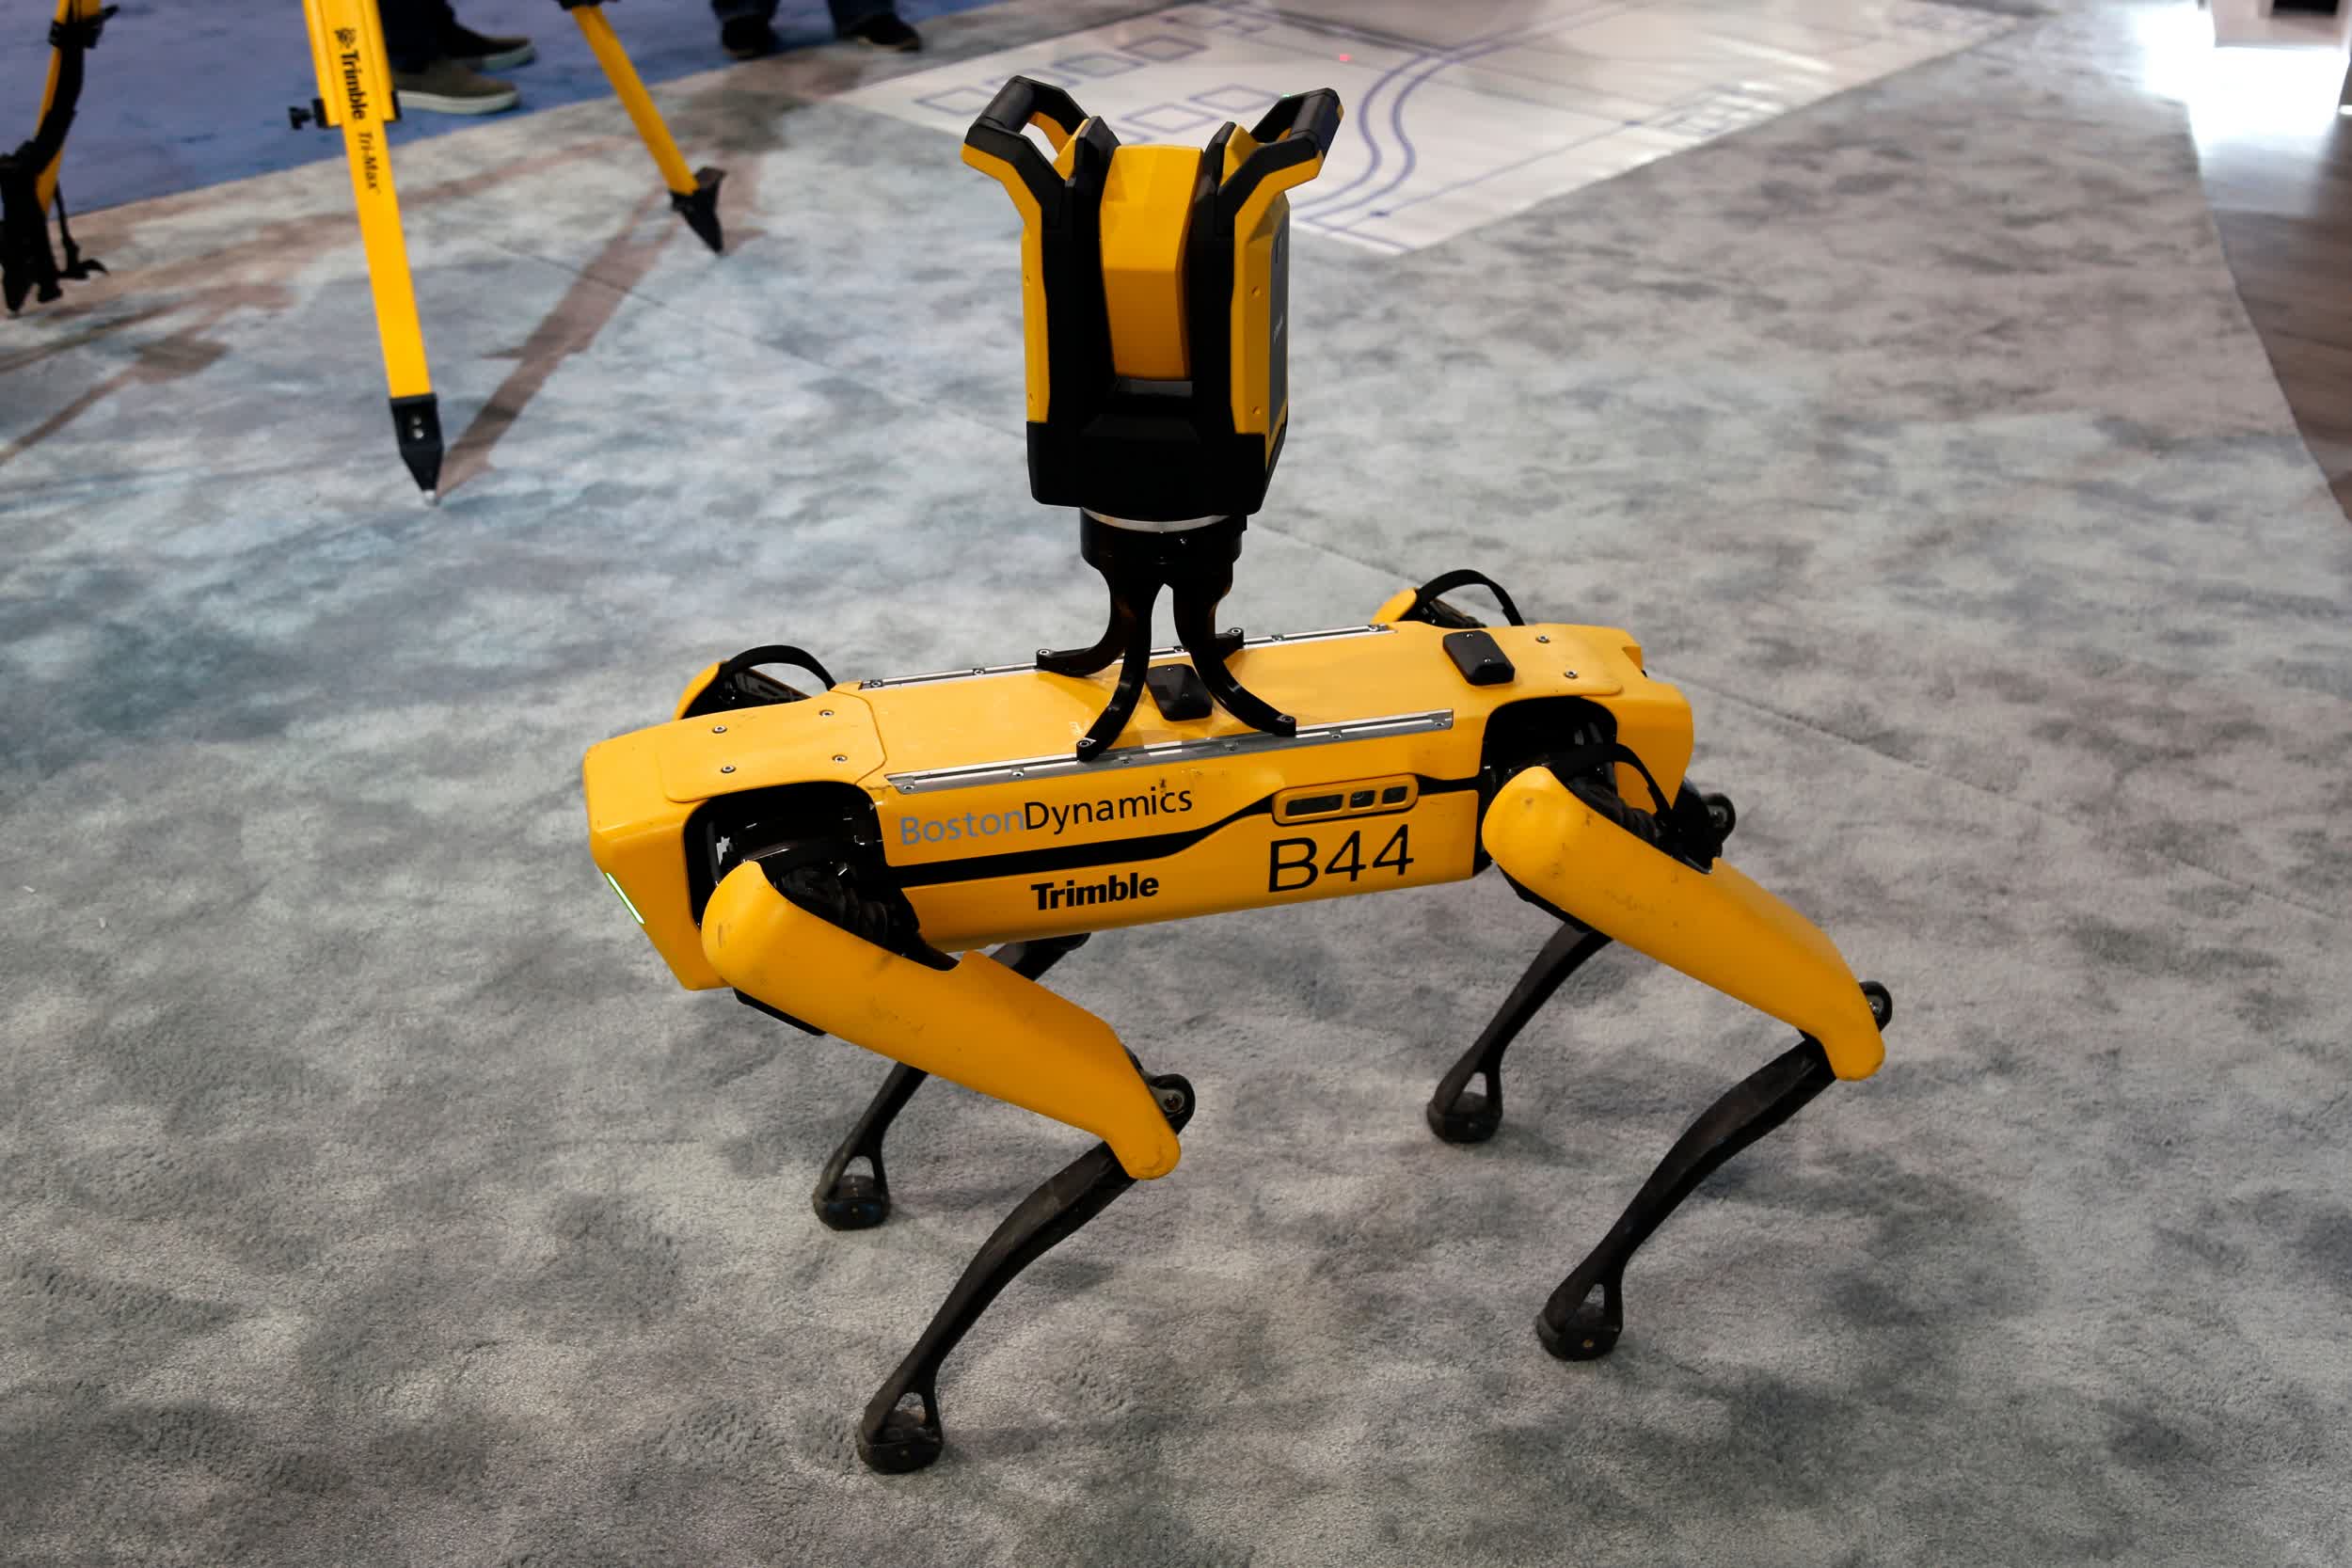 Hyundai is reportedly interested in buying Boston Dynamics from SoftBank